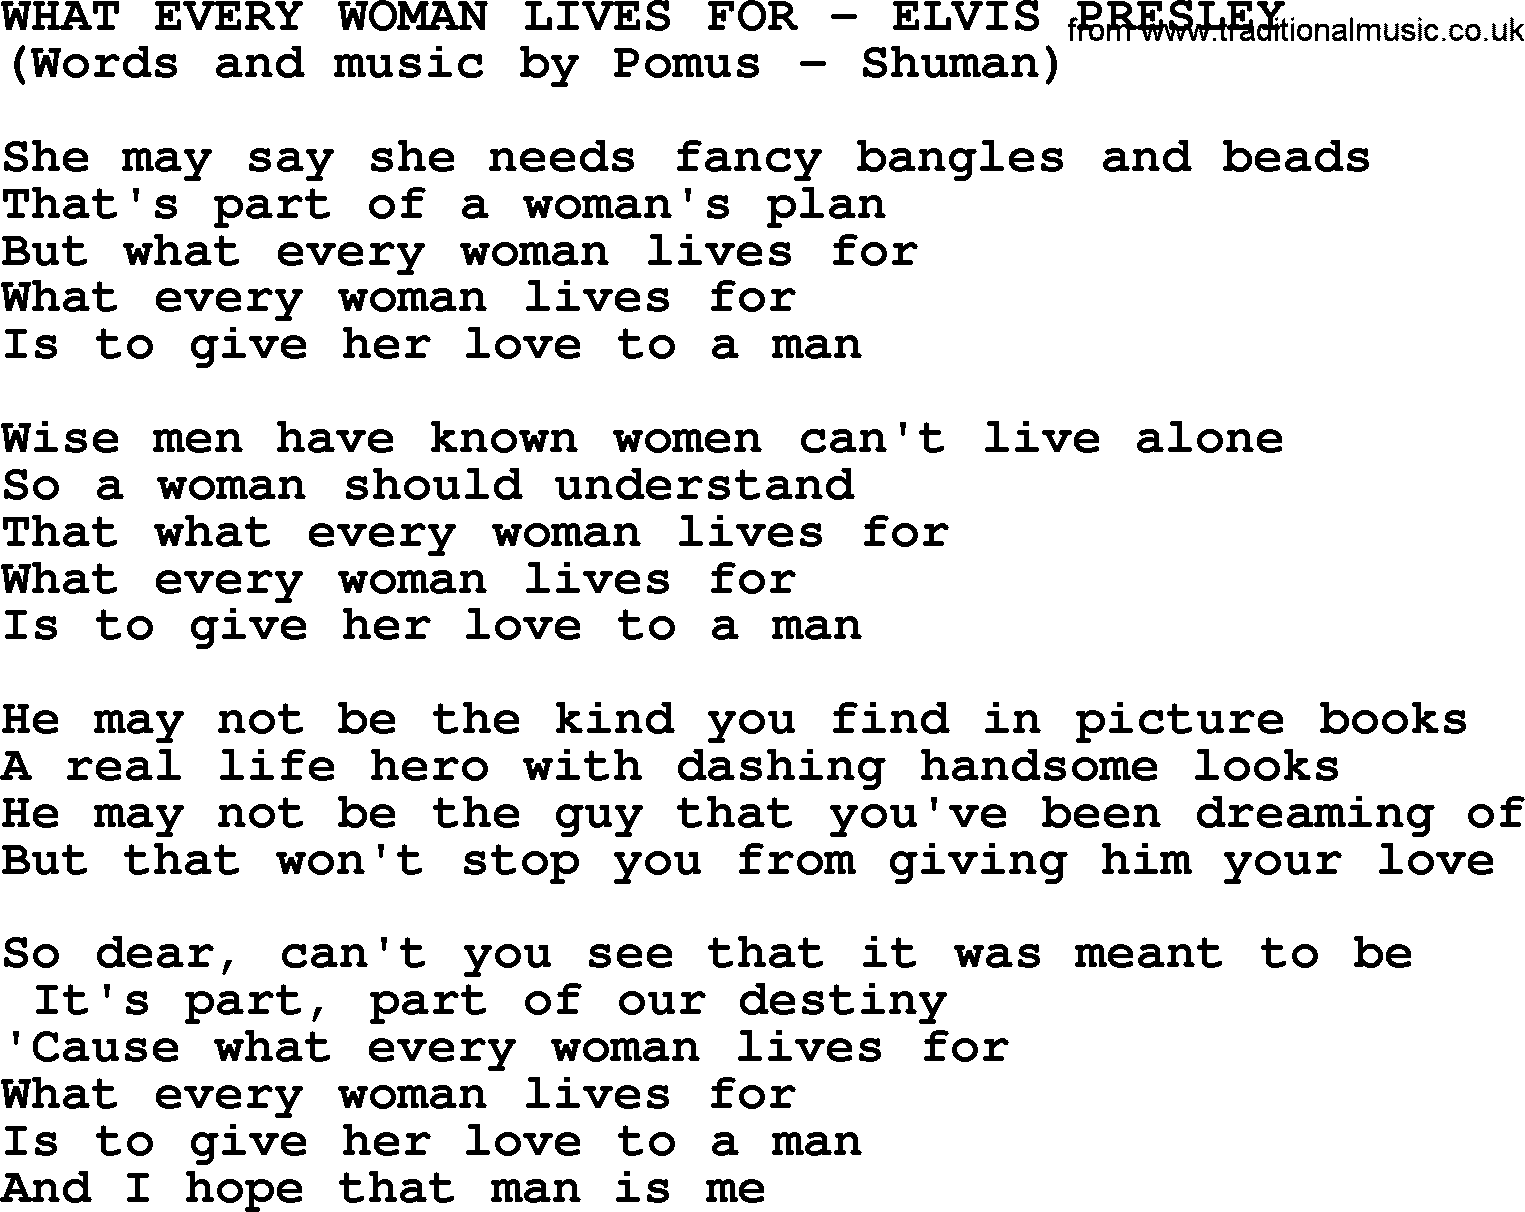 Elvis Presley song: What Every Woman Lives For lyrics